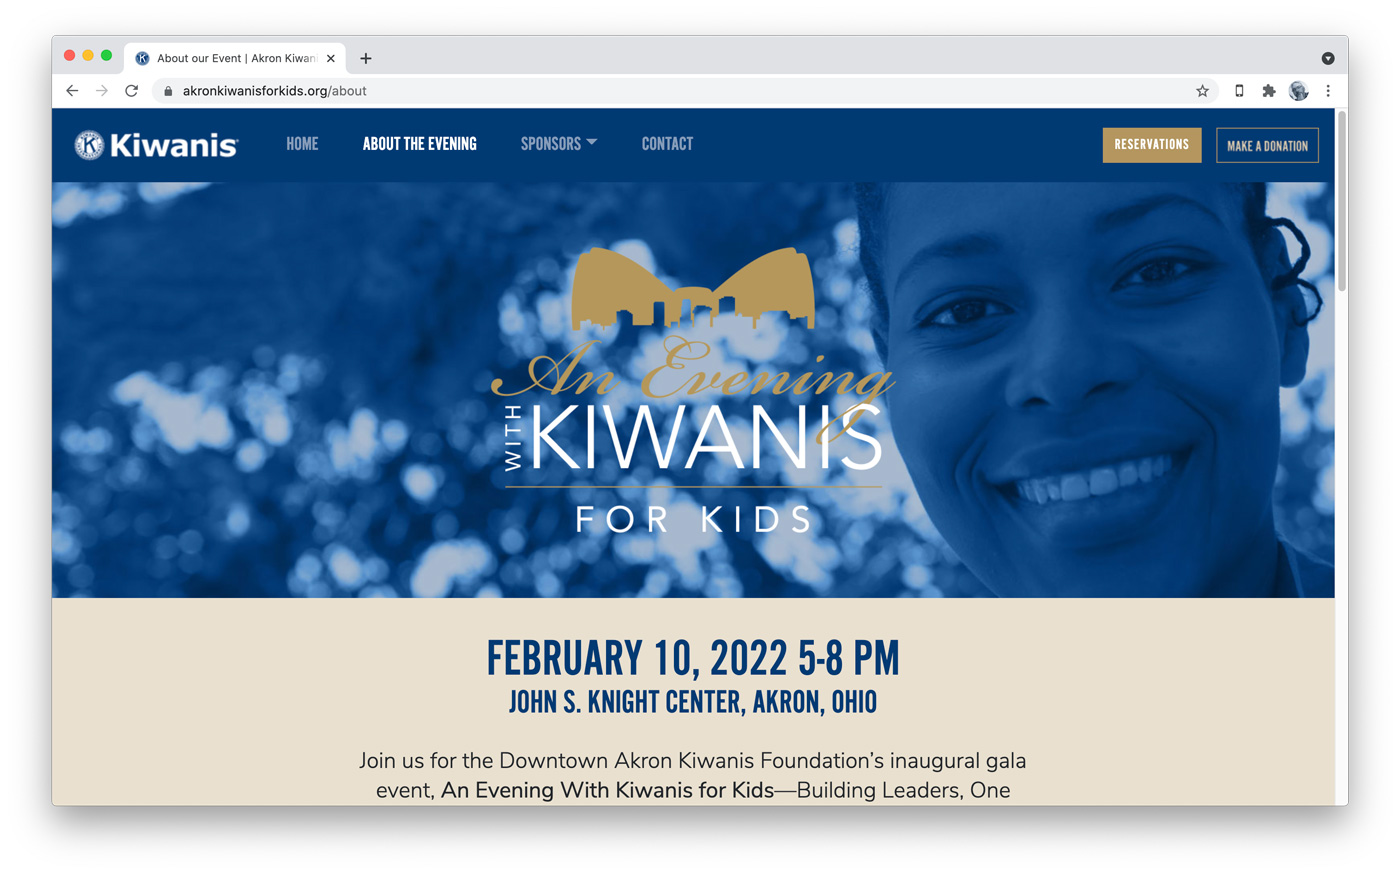 about-an-evening-with-kiwanis.jpg